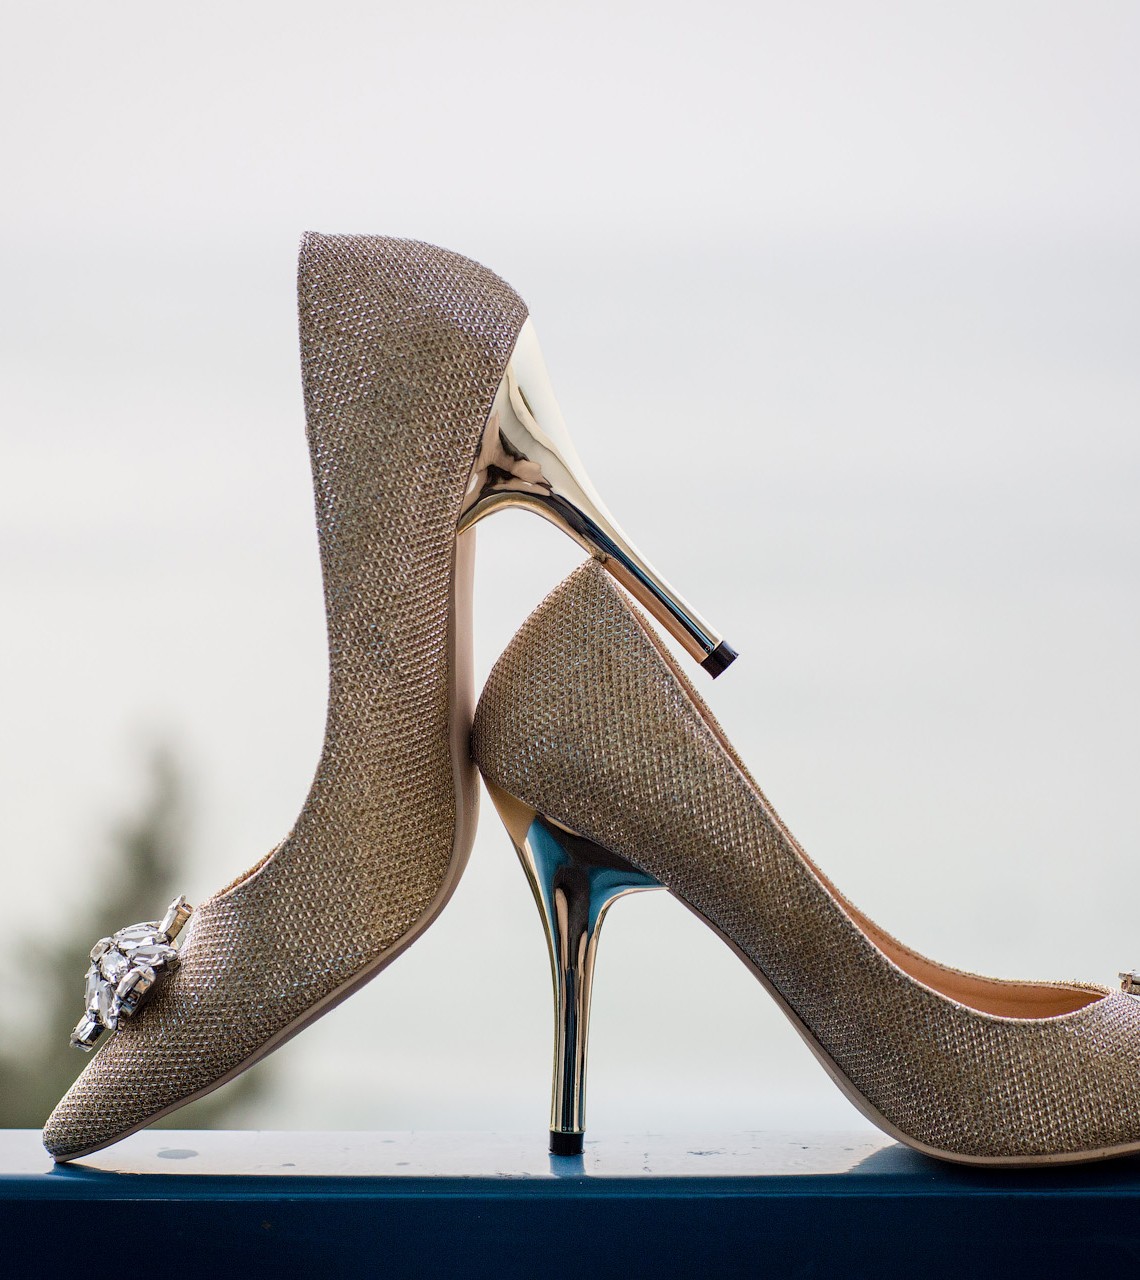 Getting cold feet? Your dream wedding shoes.